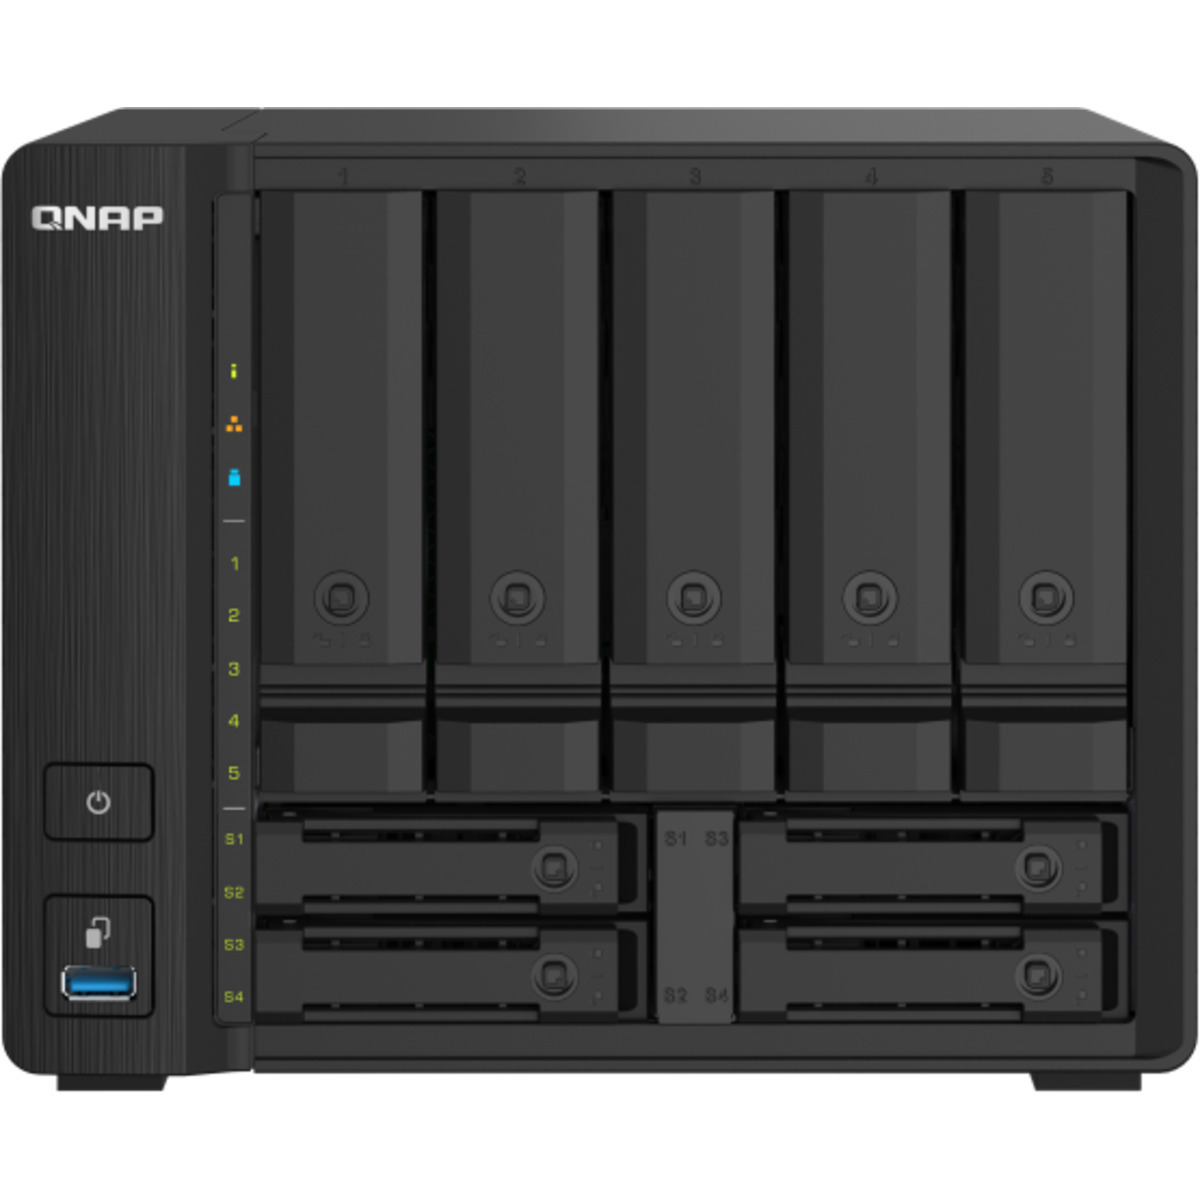 QNAP TS-932PX 2.5tb 5+4-Bay Desktop Multimedia / Power User / Business NAS - Network Attached Storage Device 5x500gb Samsung 870 EVO MZ-77E500BAM 2.5 560/530MB/s SATA 6Gb/s SSD CONSUMER Class Drives Installed - Burn-In Tested - FREE RAM UPGRADE TS-932PX